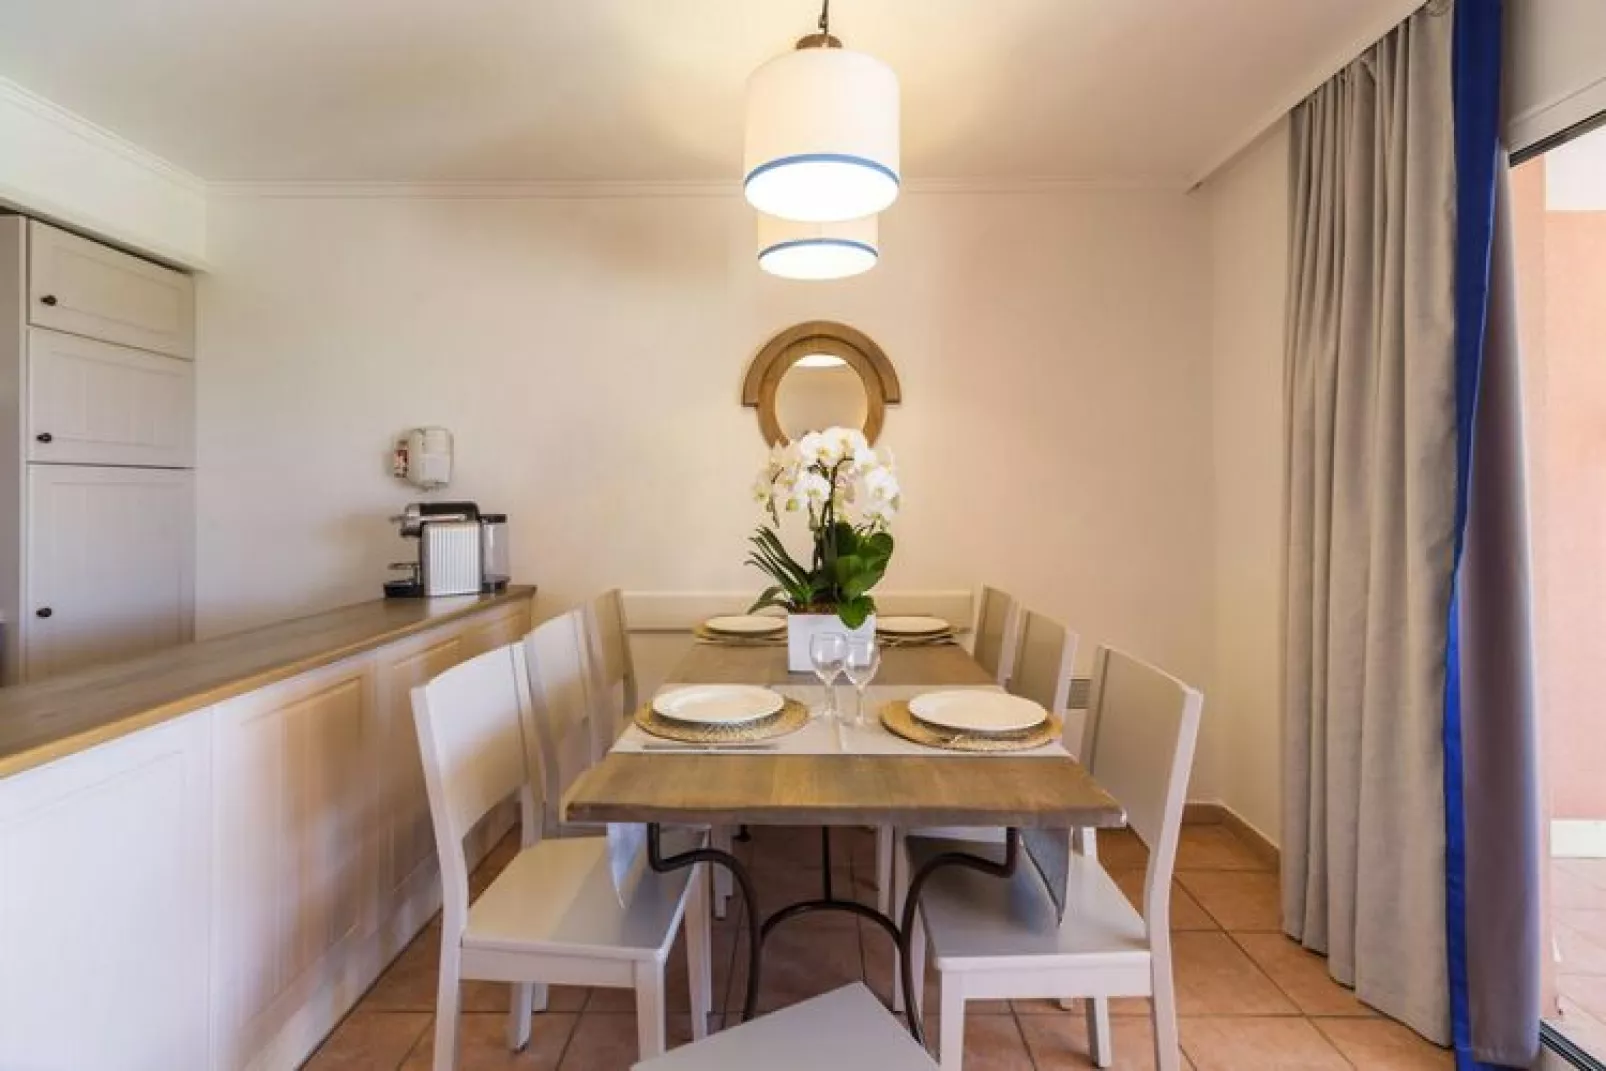 Residence Les Calanques, Les Issambres-27 Standard - Apt. 6 p. - 1 bedroom+1 sleeping alcove - terrace-Woonkamer